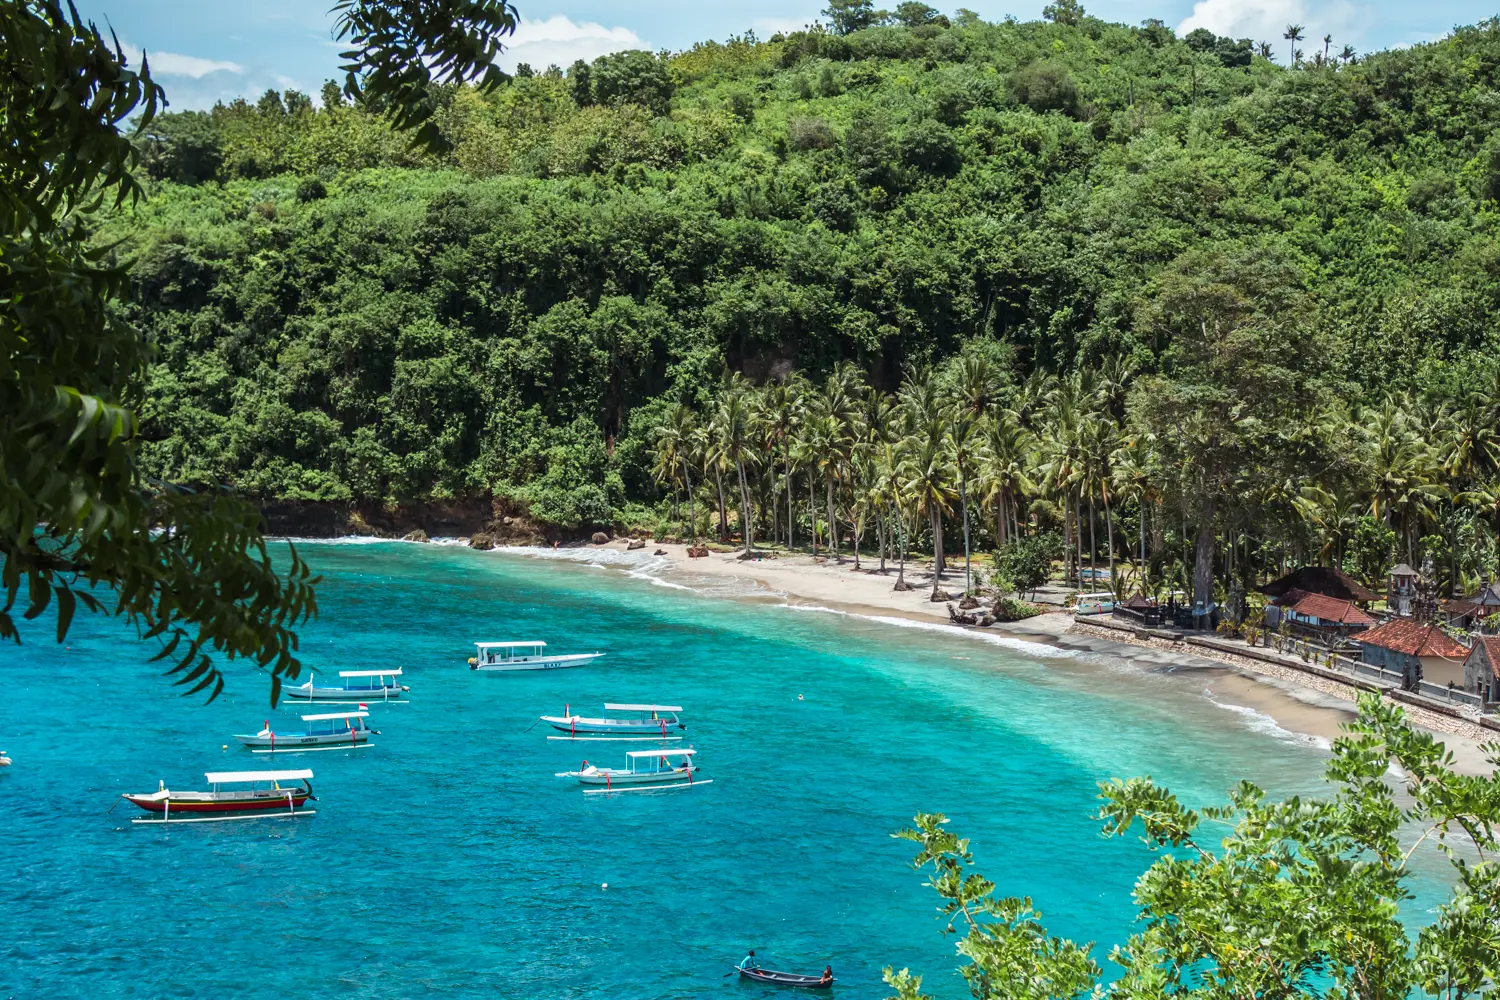 View of the turquoise ocean and palm trees of Crystal Bay, one of the many reasons to visit Nusa Penida. I Nusa Penida worth visiting? Yes.